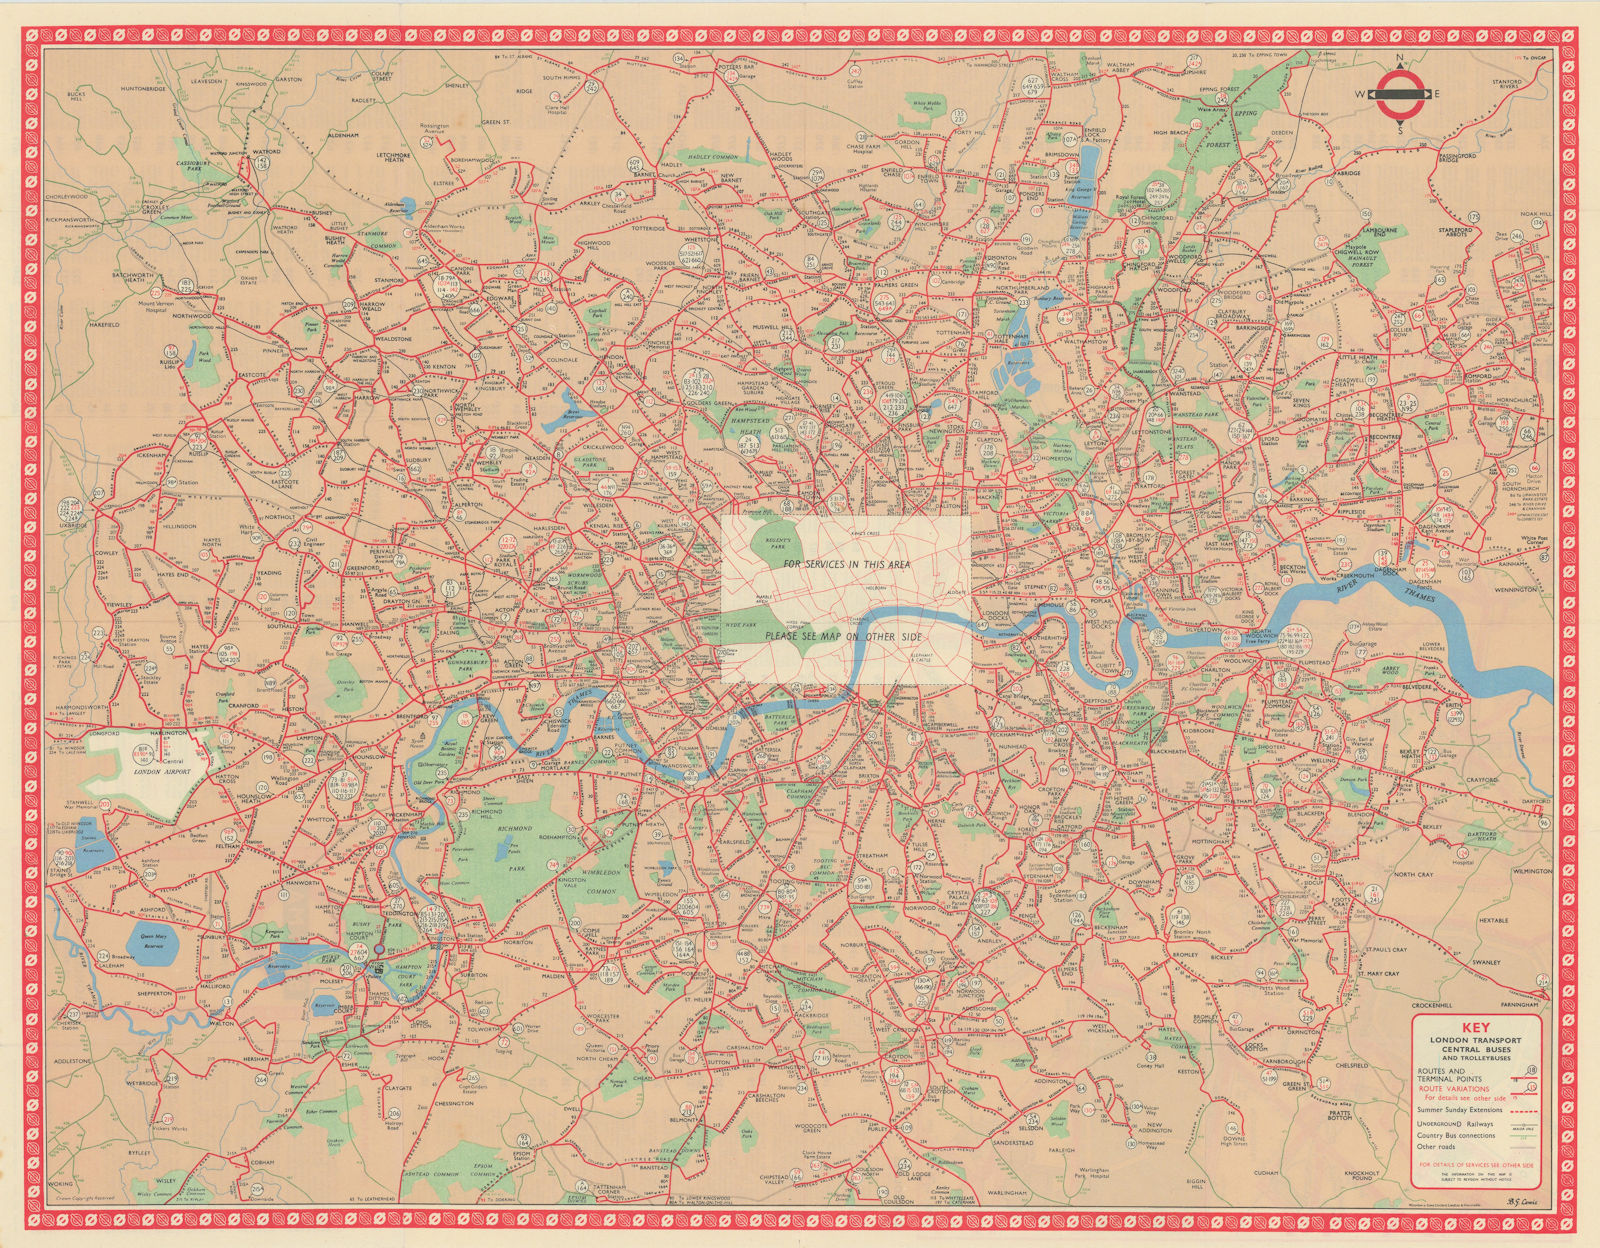 London Transport Bus map Central Area inc. Trolleybuses. LEWIS #4 1960 old